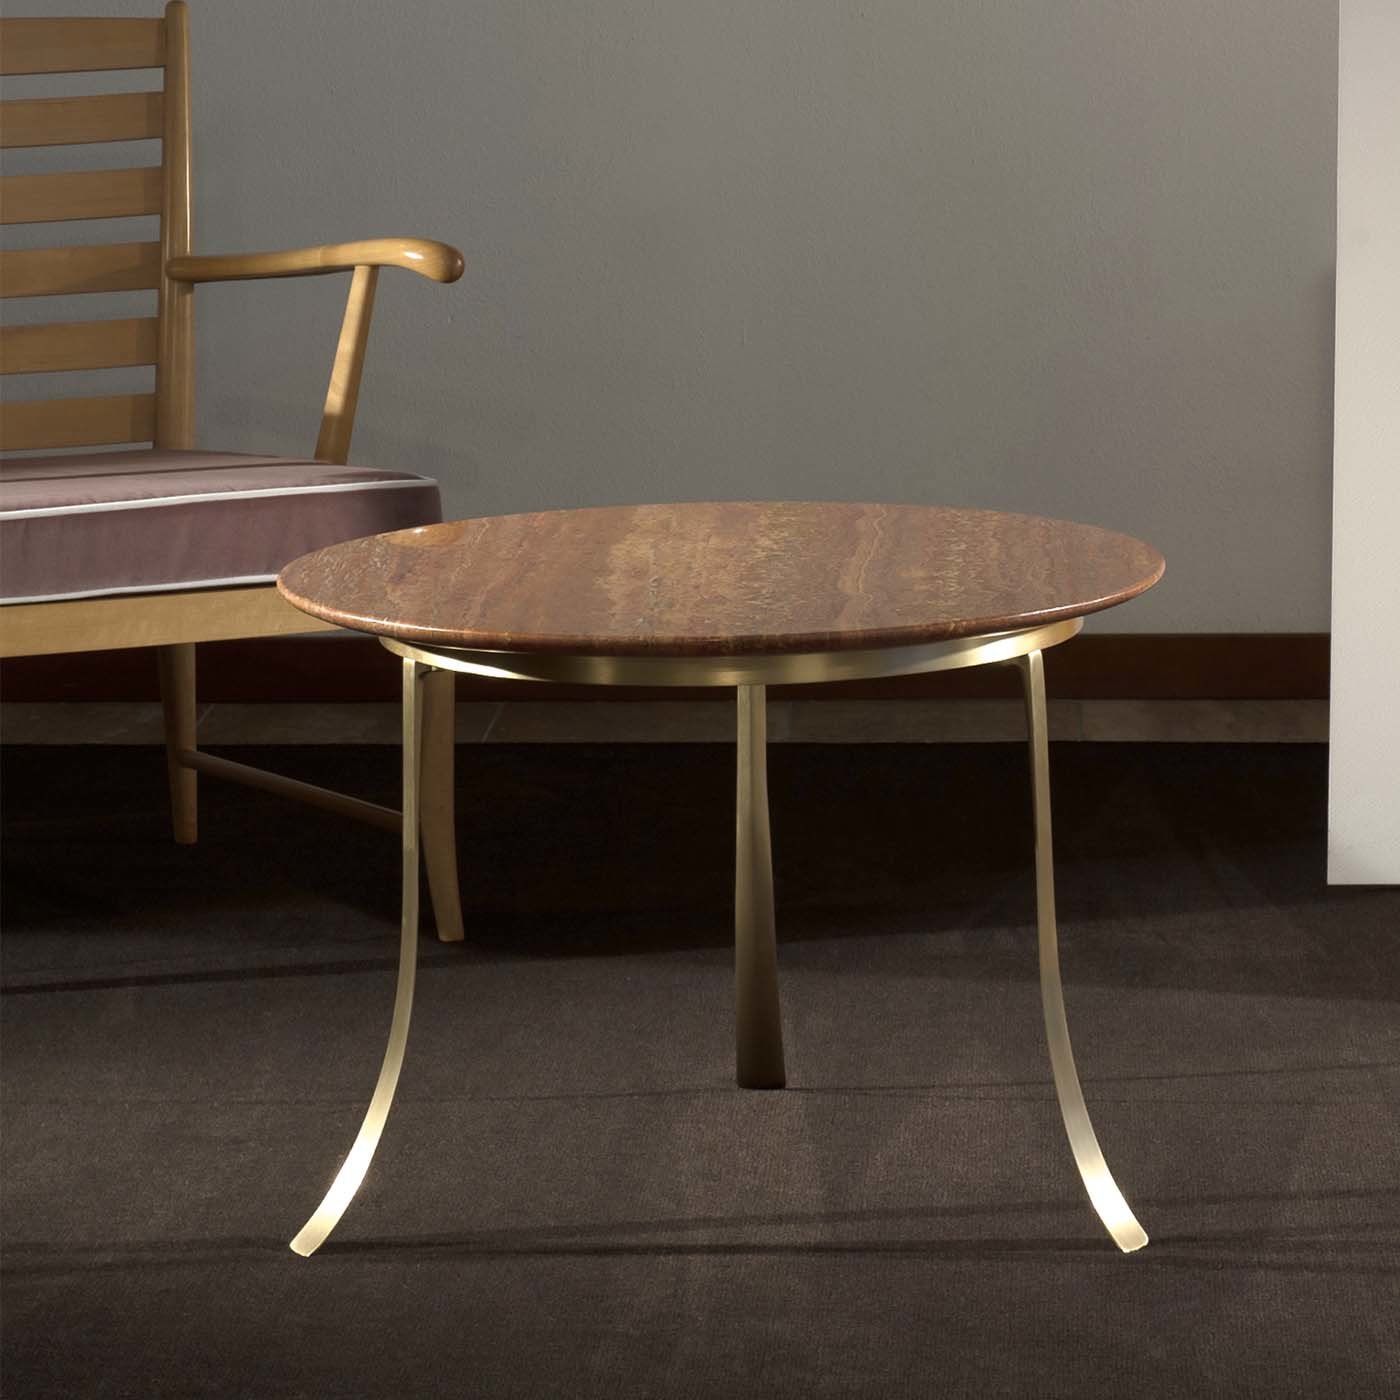 1946 Brass Coffee Table by Paolo Buffa - Alternative view 1